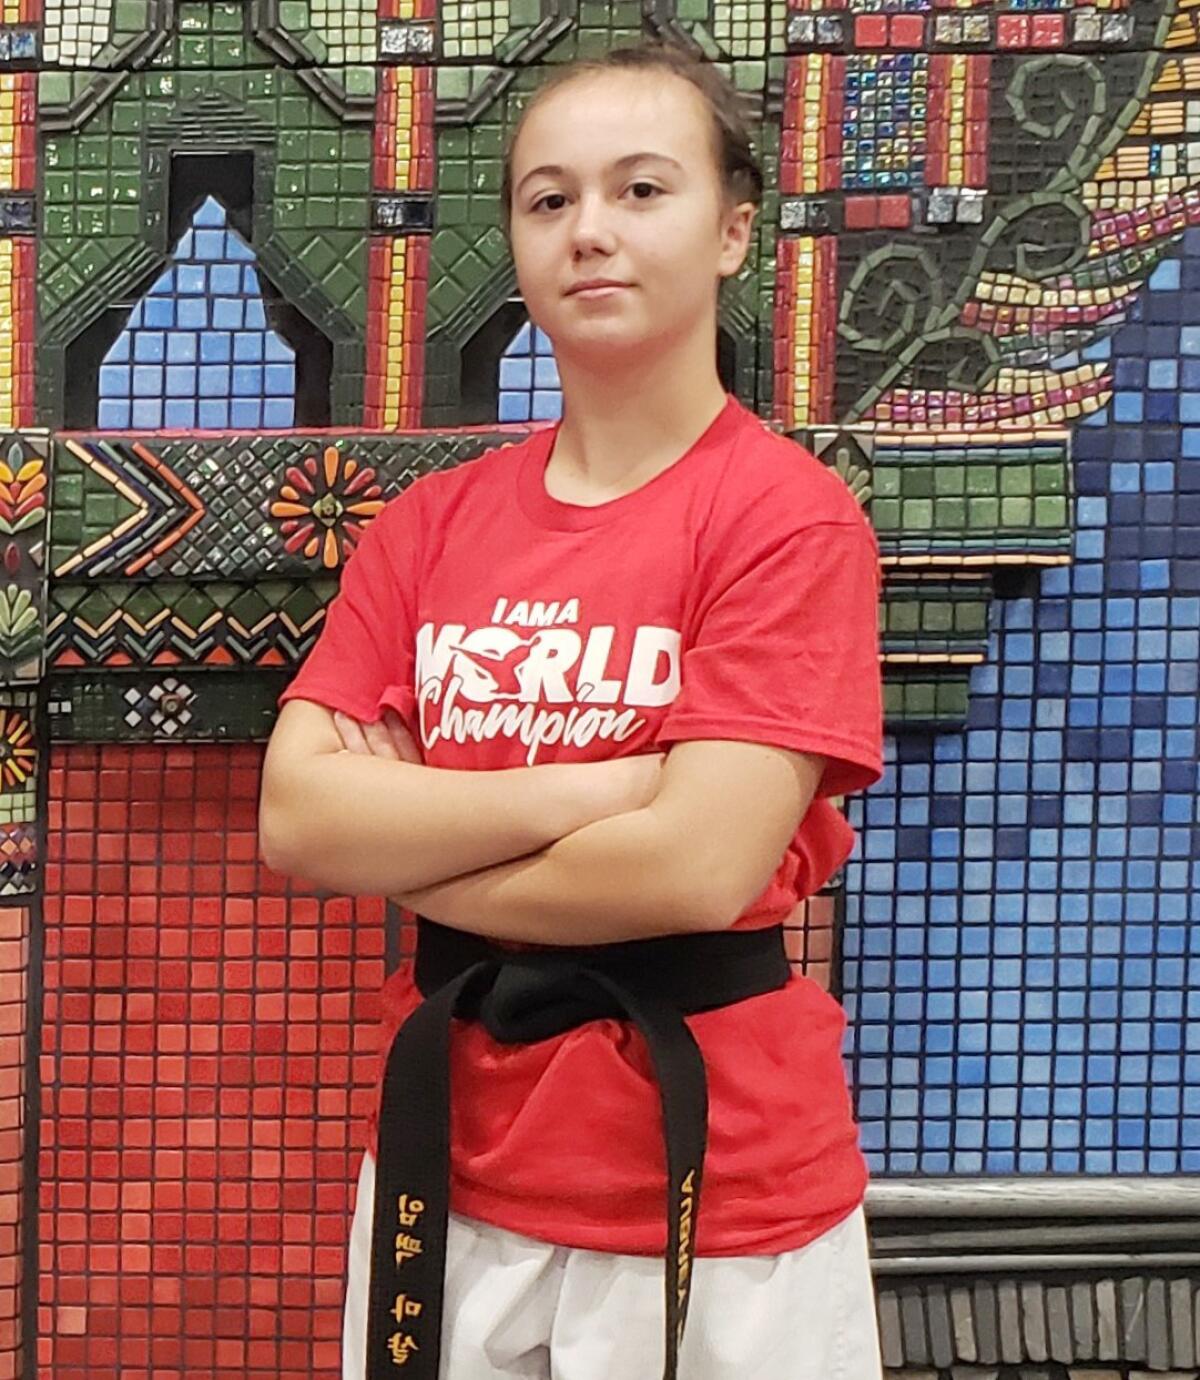 Aubrey McLean won gold in Xtreme Weapons and silver in Creative Weapons at the Songahm Taekwondo World Championships.